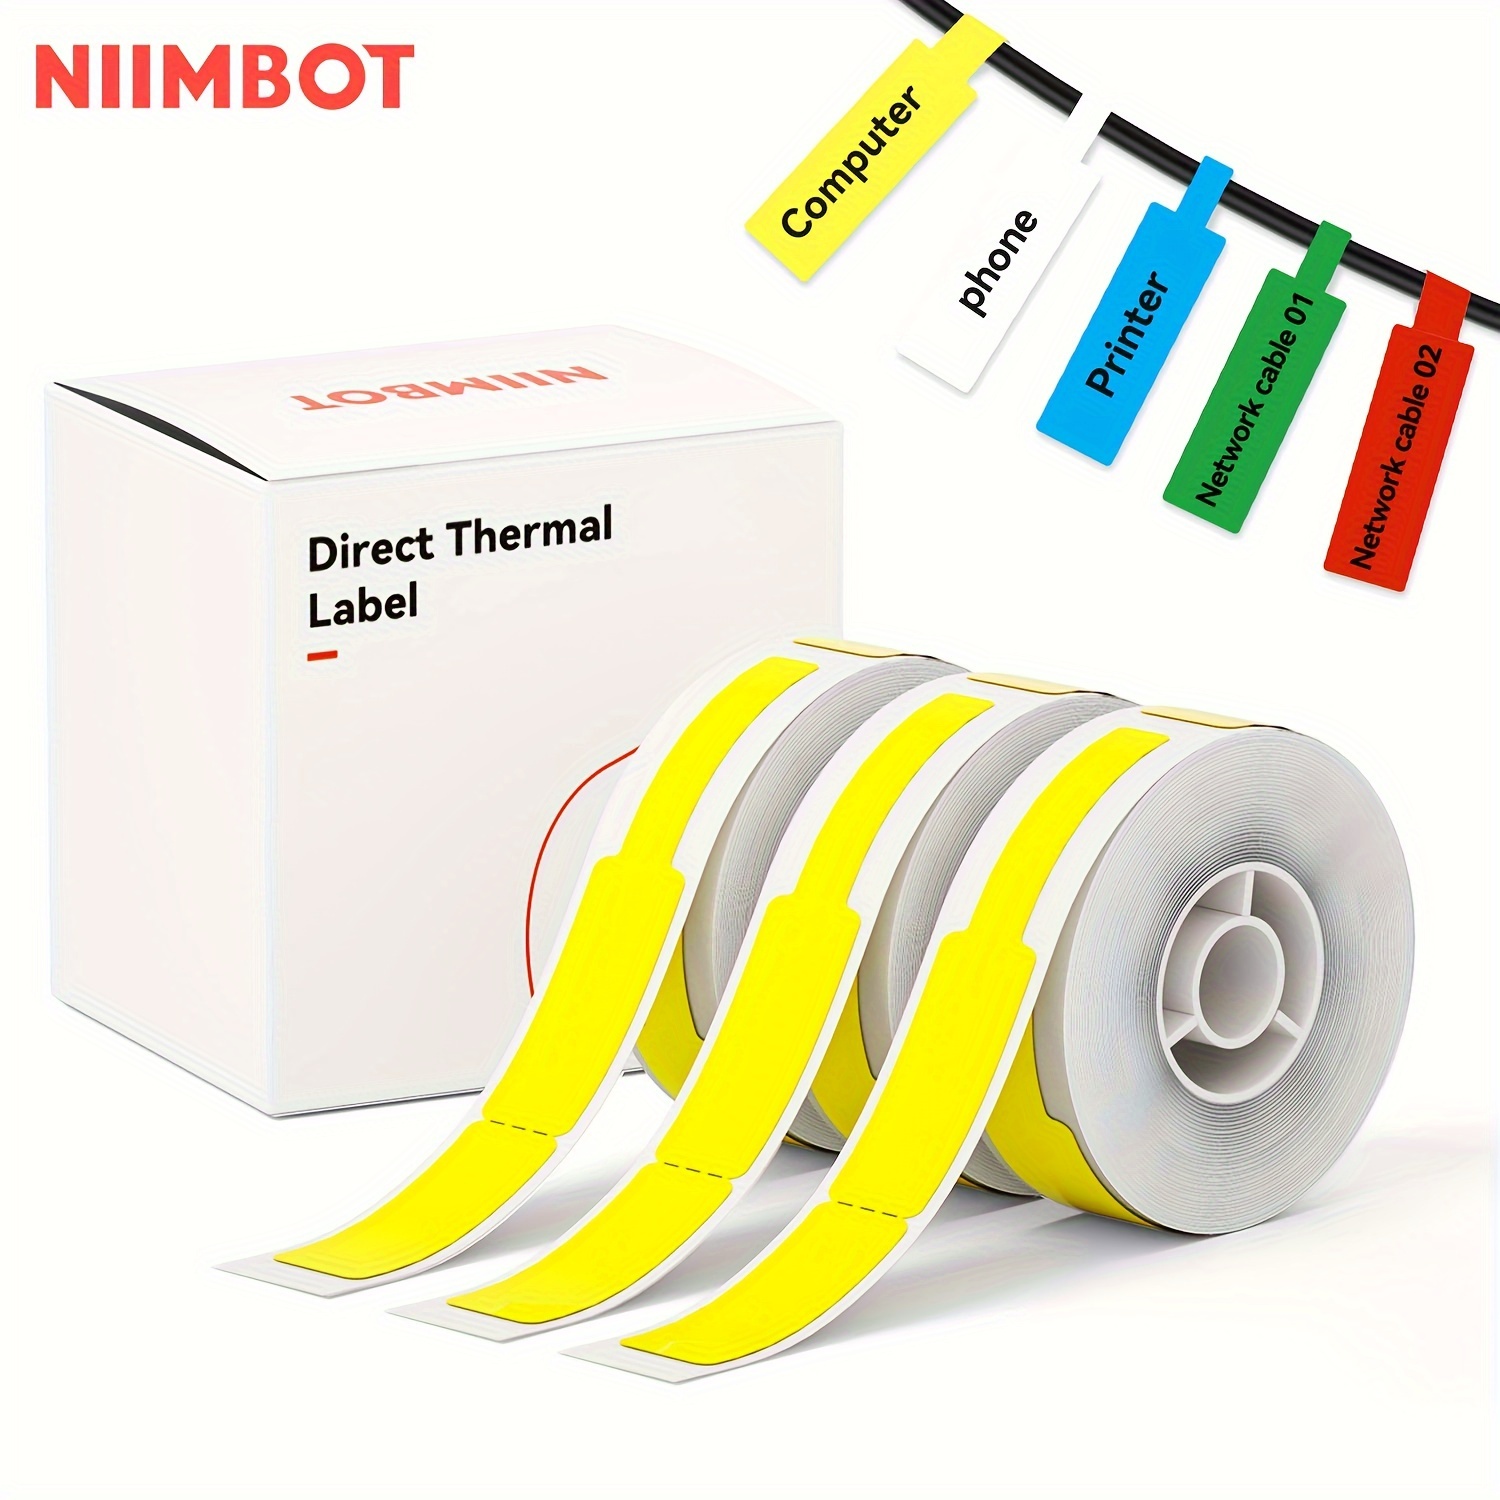 

3 Roll, Niimbot Cables Labels For D11/d110/d101/h1s Label Printer, Direct Thermal Label For Cable/wire/jewerly, Sticker Label 12.5mmx74mm+35mm (0.49" X 4.29"), 65 Labels/roll, Solid Color